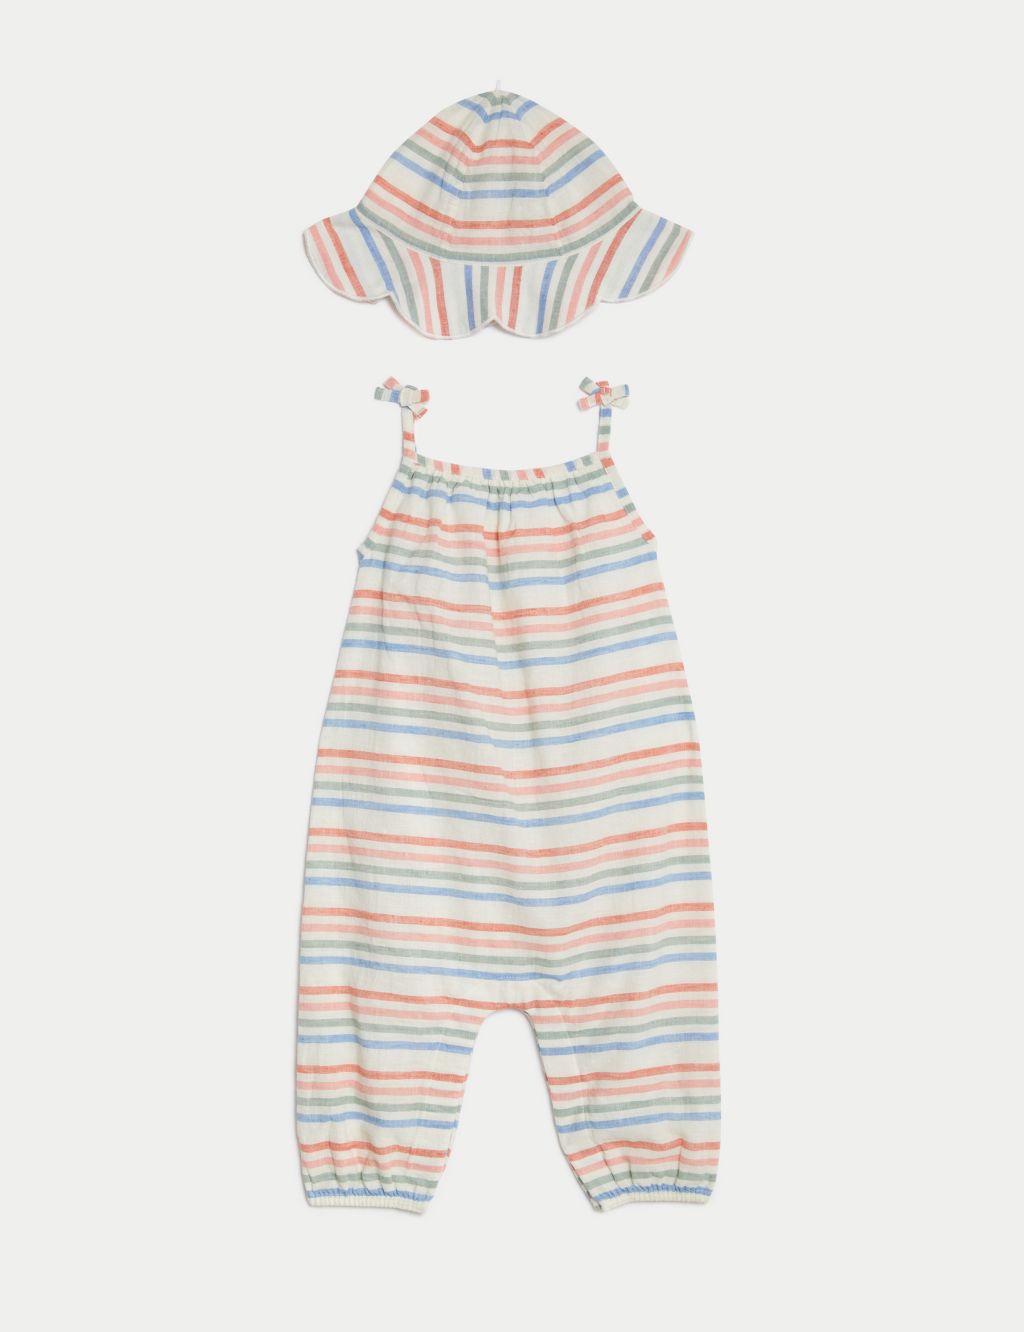 2pc Cotton Rich Striped Outfit (0-3 Yrs)